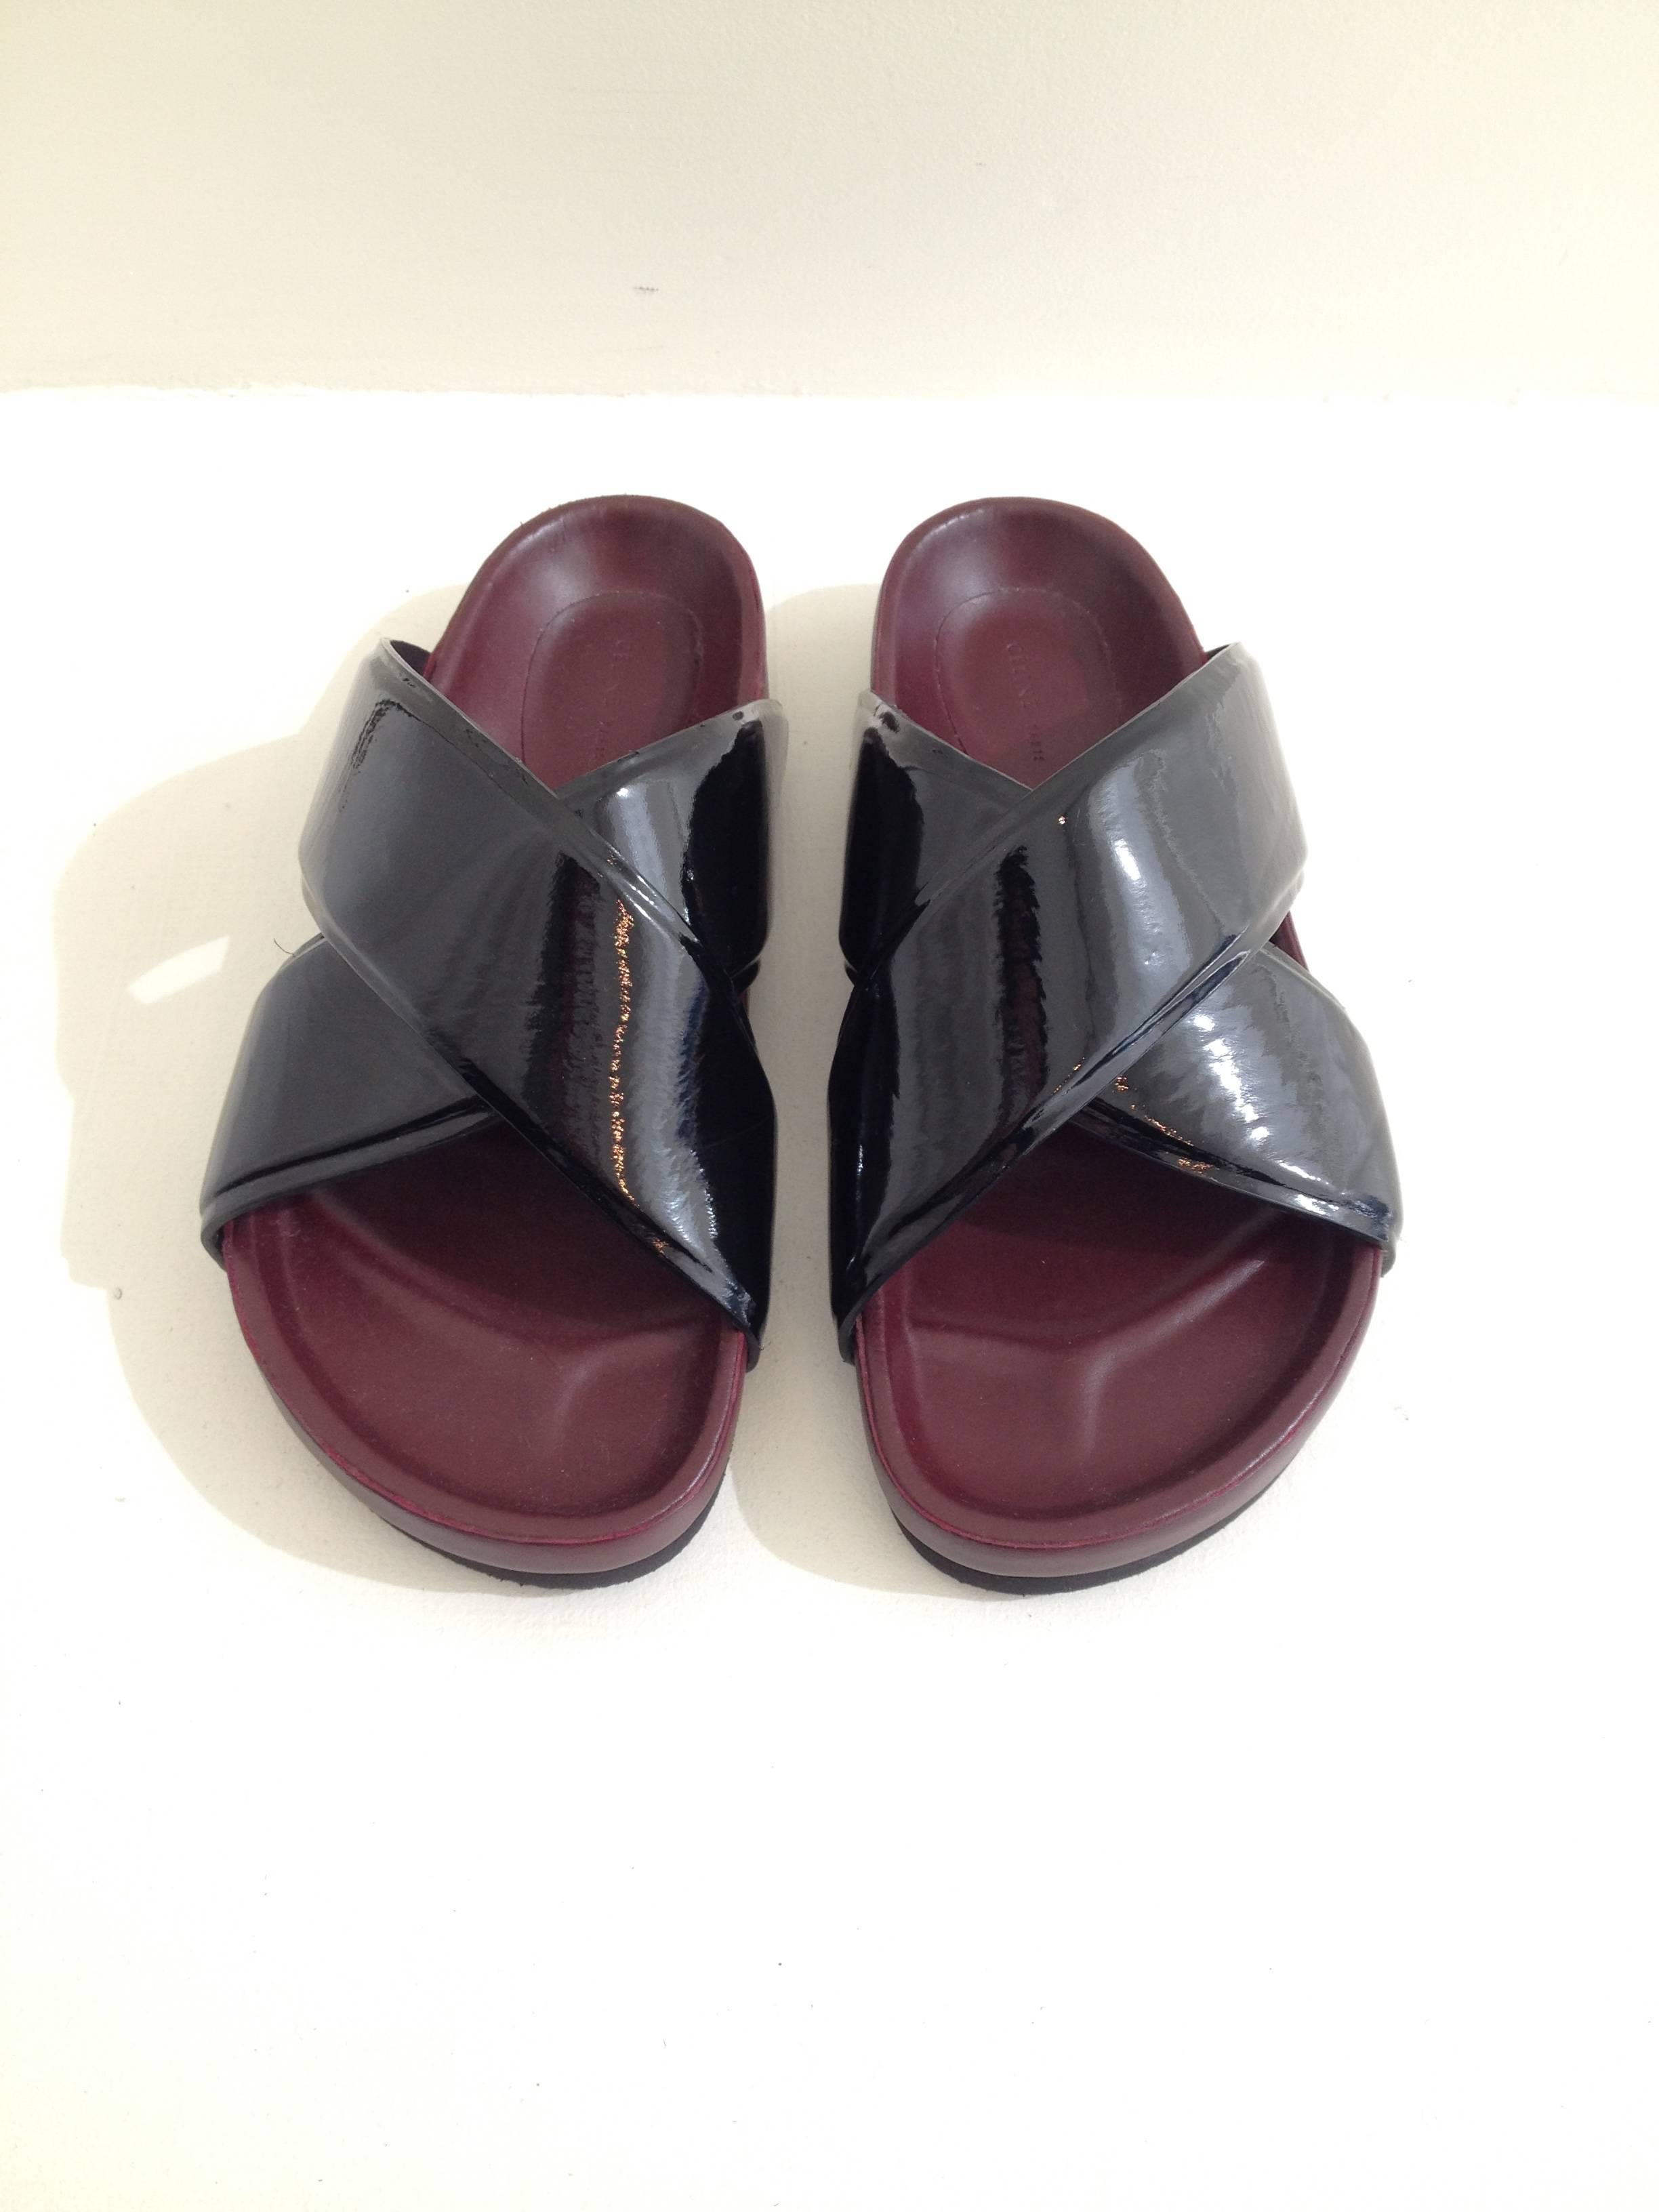 Slide right into summer. These flat sandals by Celine are on-trend and perfect for the season - the thick, contoured, Birkenstock-esque sole are super comfortable and easy to wear, while the wide patent crossed straps add a little shine. These are